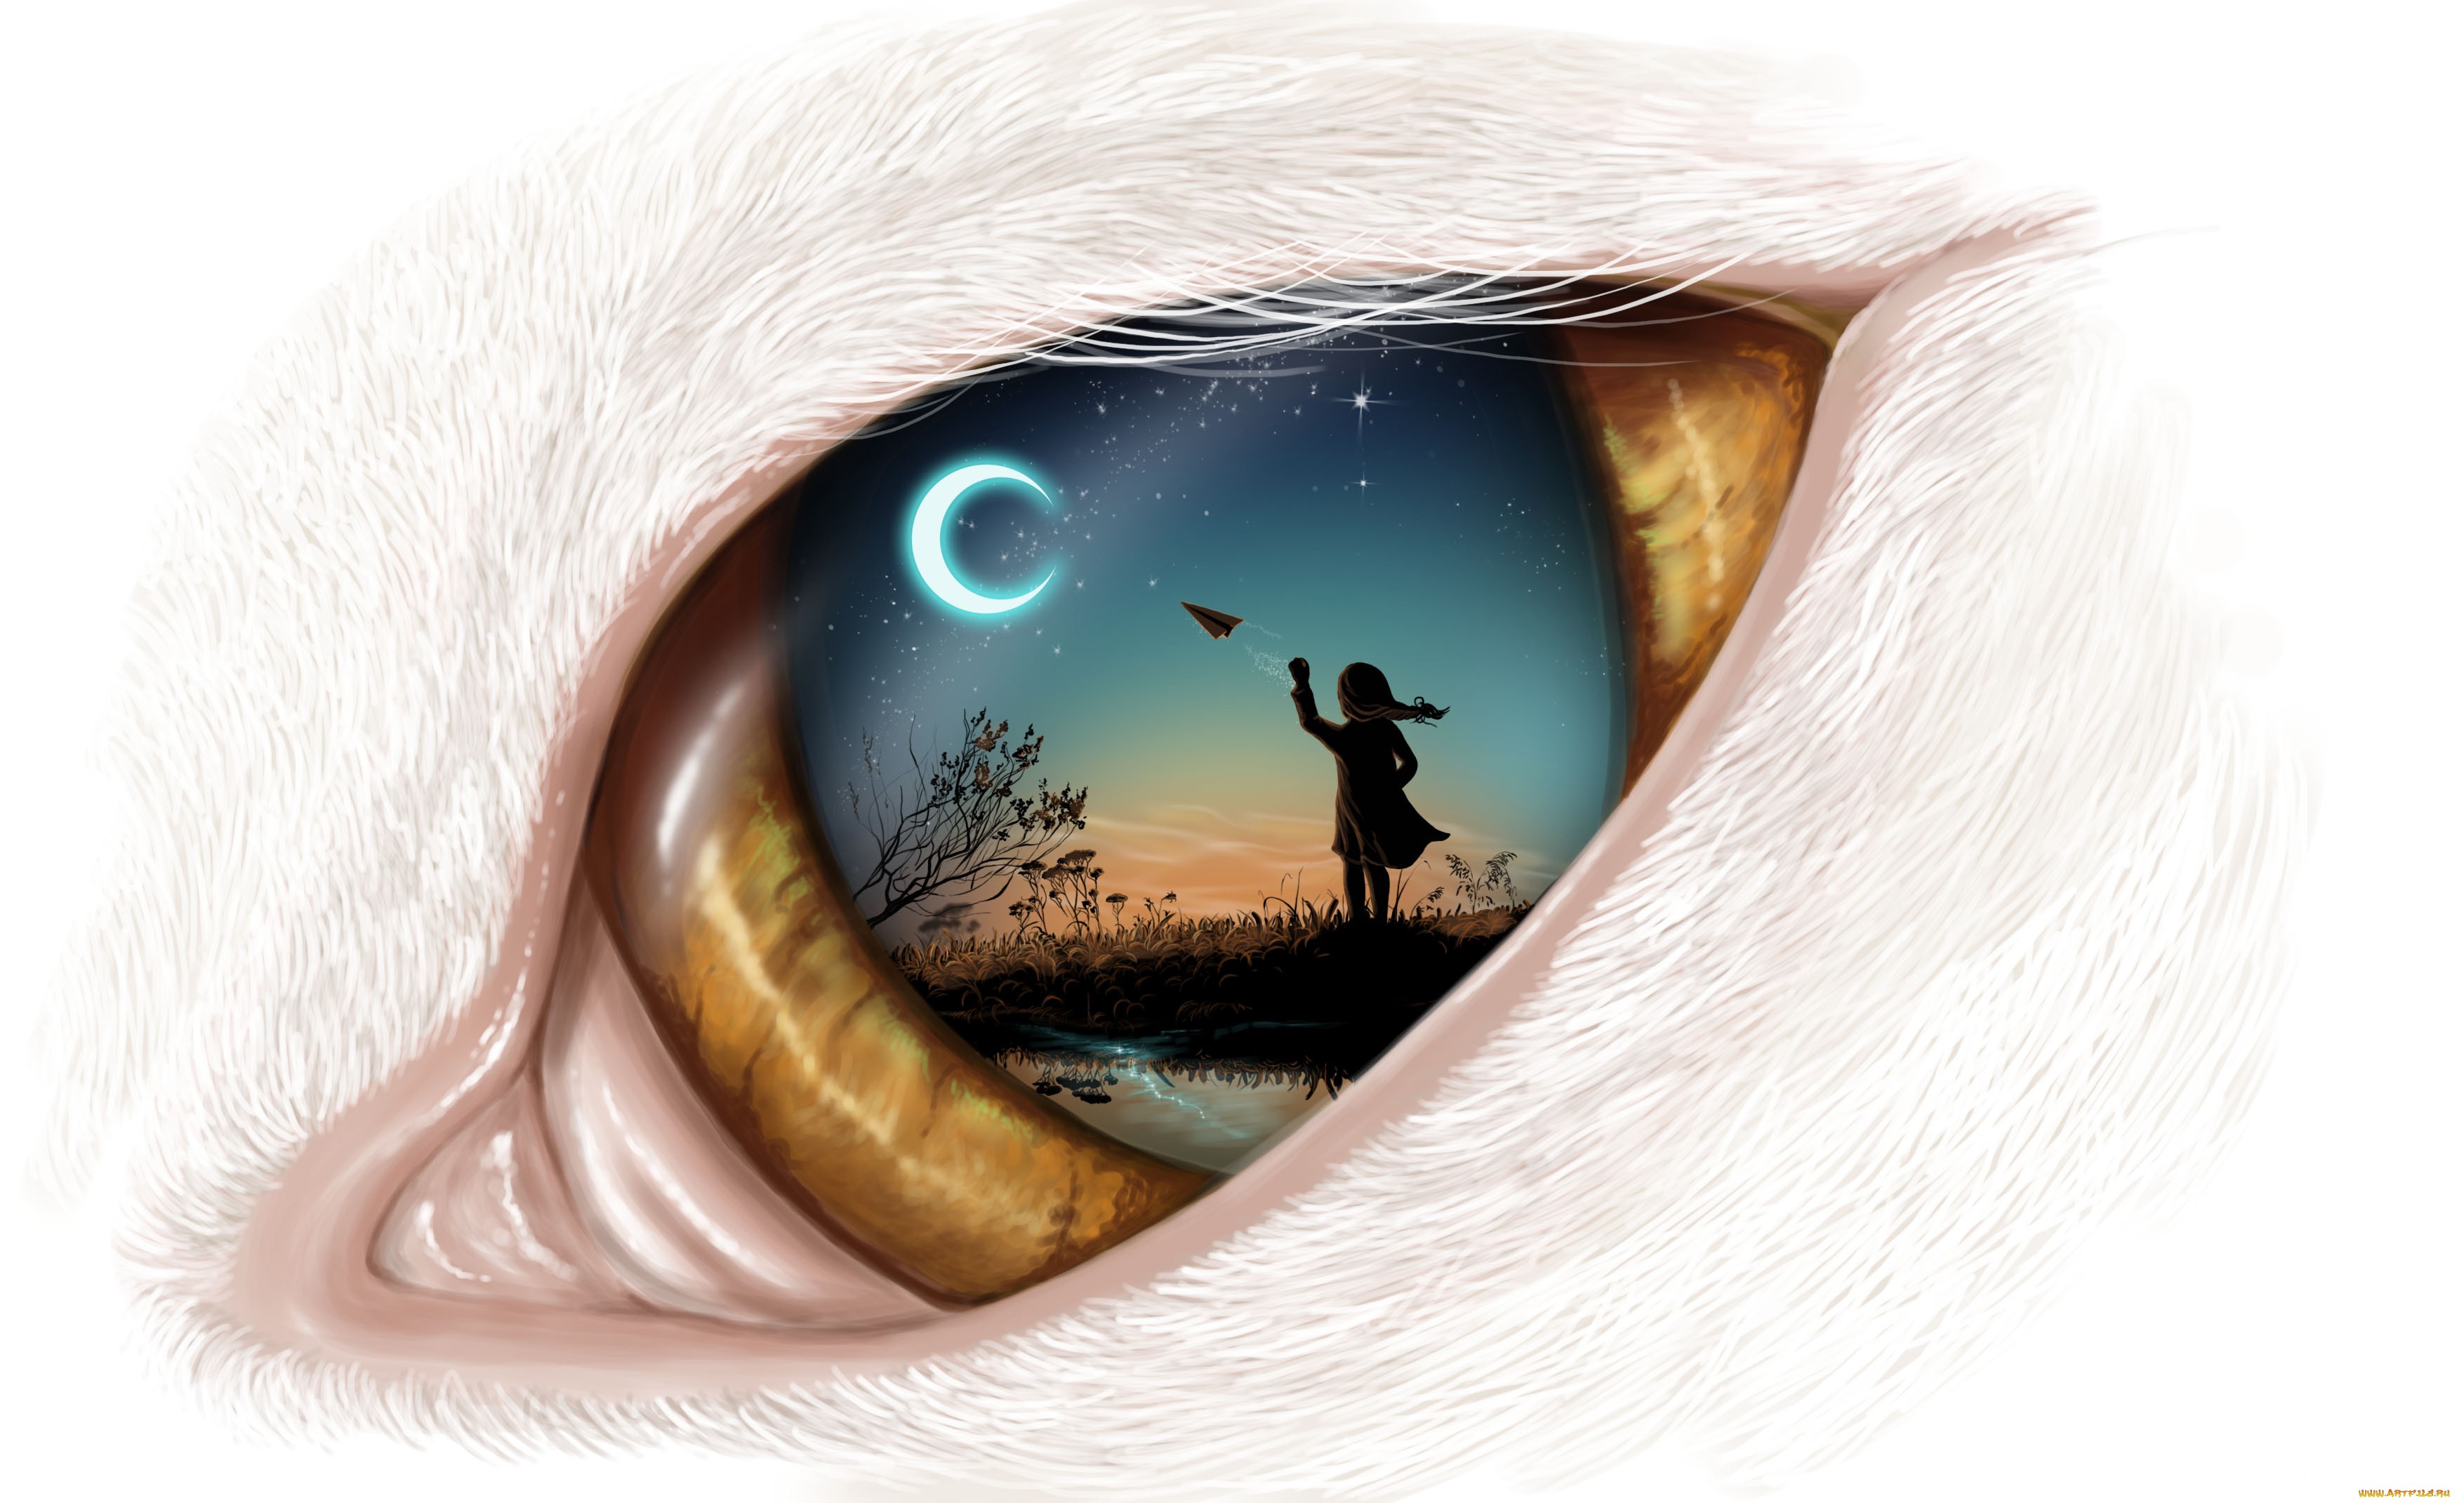 Dream In Eye, HD Artist, 4k Wallpaper, Image, Background, Photo and Picture